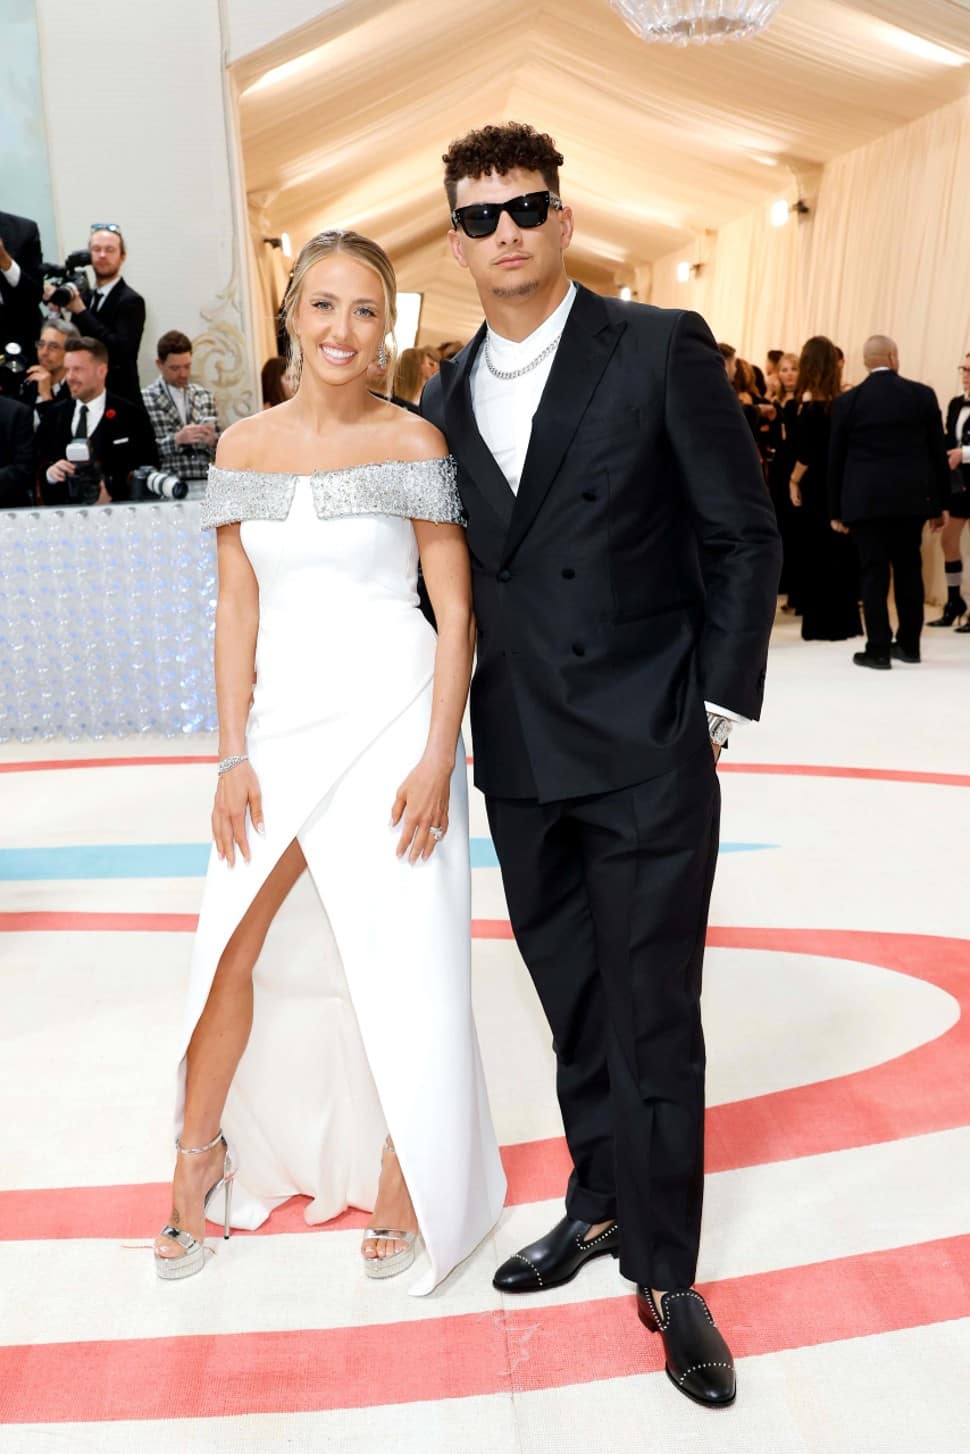 Super Bowl-winning quarterback Patrick Mahomes turned up in a black suit from Hugo Boss. His wife, Brittany, wore an off-the-shoulder white gown that was bedazzled at the top. (Source: Twitter)